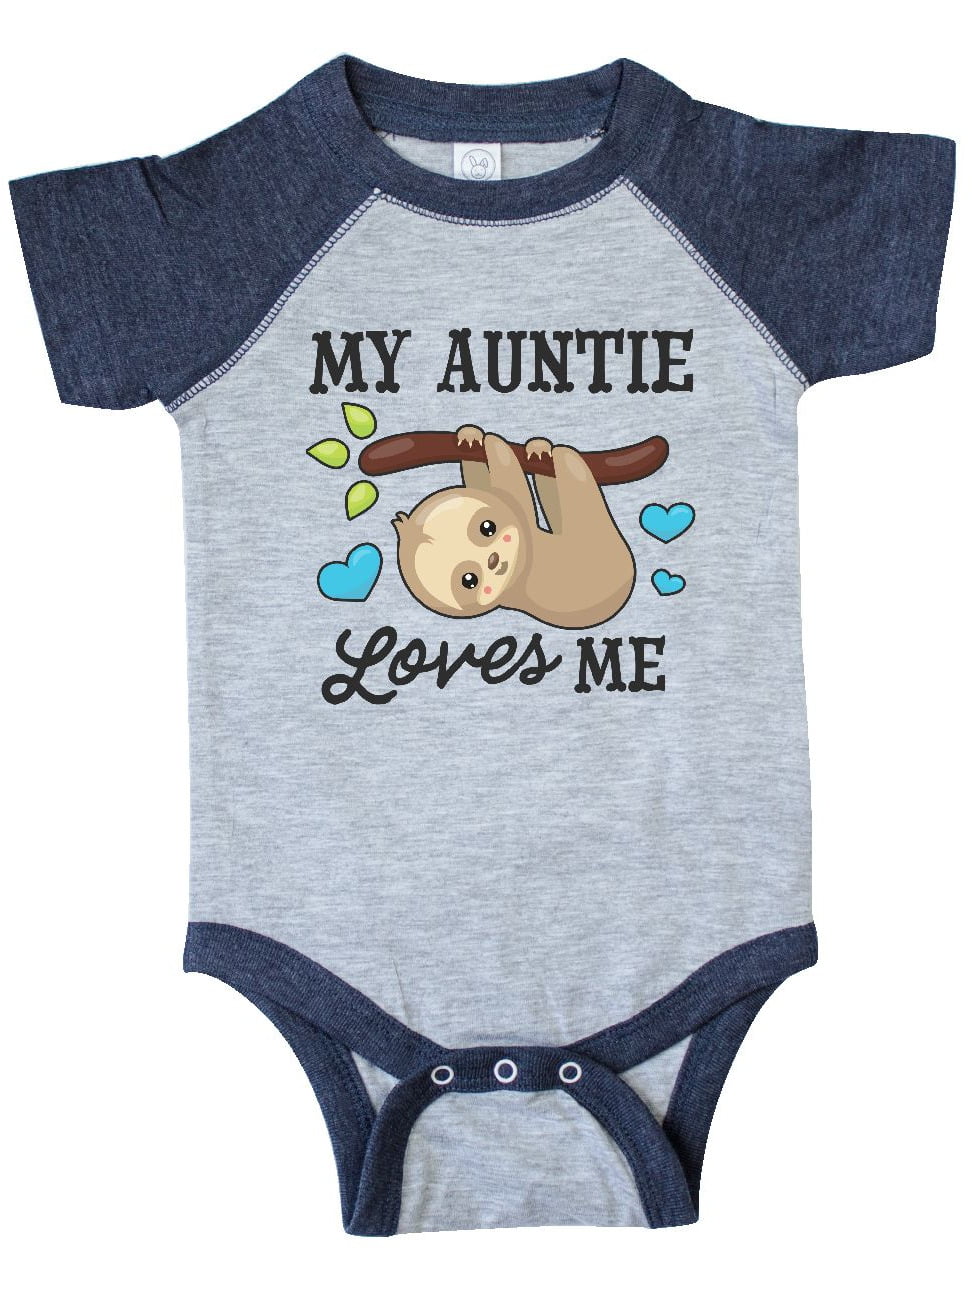 2019 New My Auntie Loves Me with Sloth and Hearts Infant Creeper 